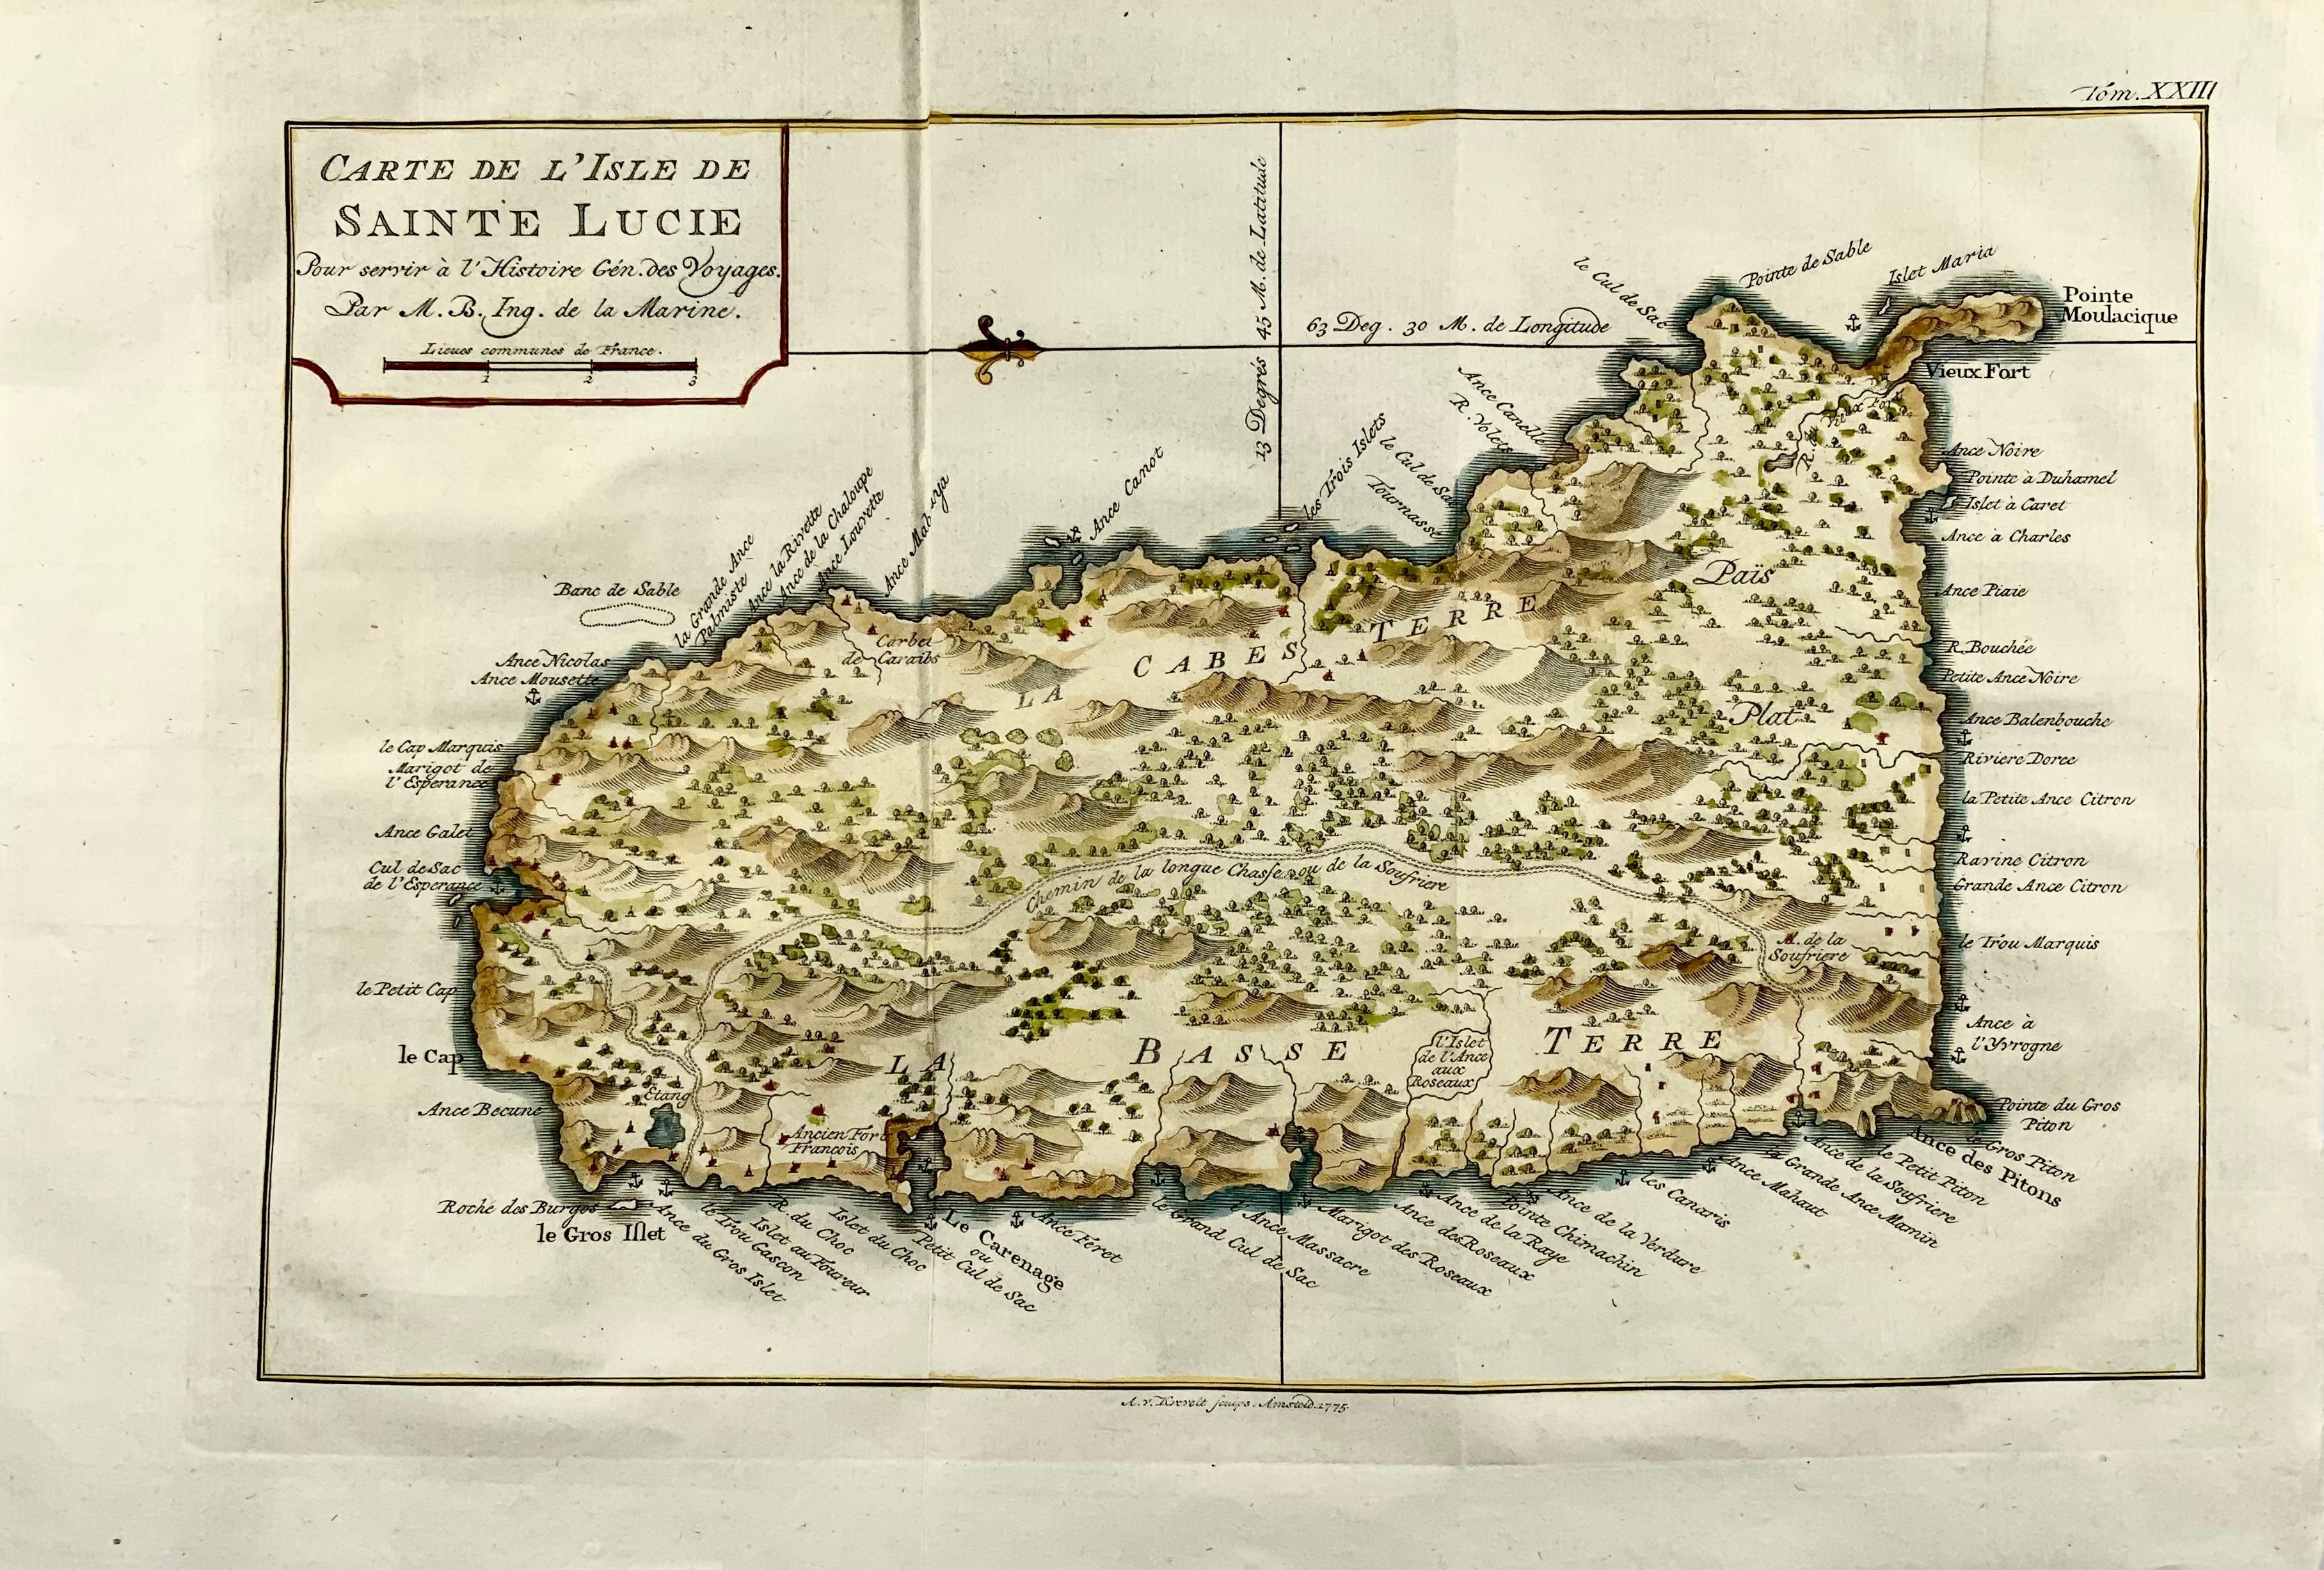 Carte De L’Isle De Sainte Lucie

Detailed copper engraved map of Saint Lucia by Jacques Nicolas Bellin.

This map was completed by Krevely 1775 for for the rare Dutch edition of 